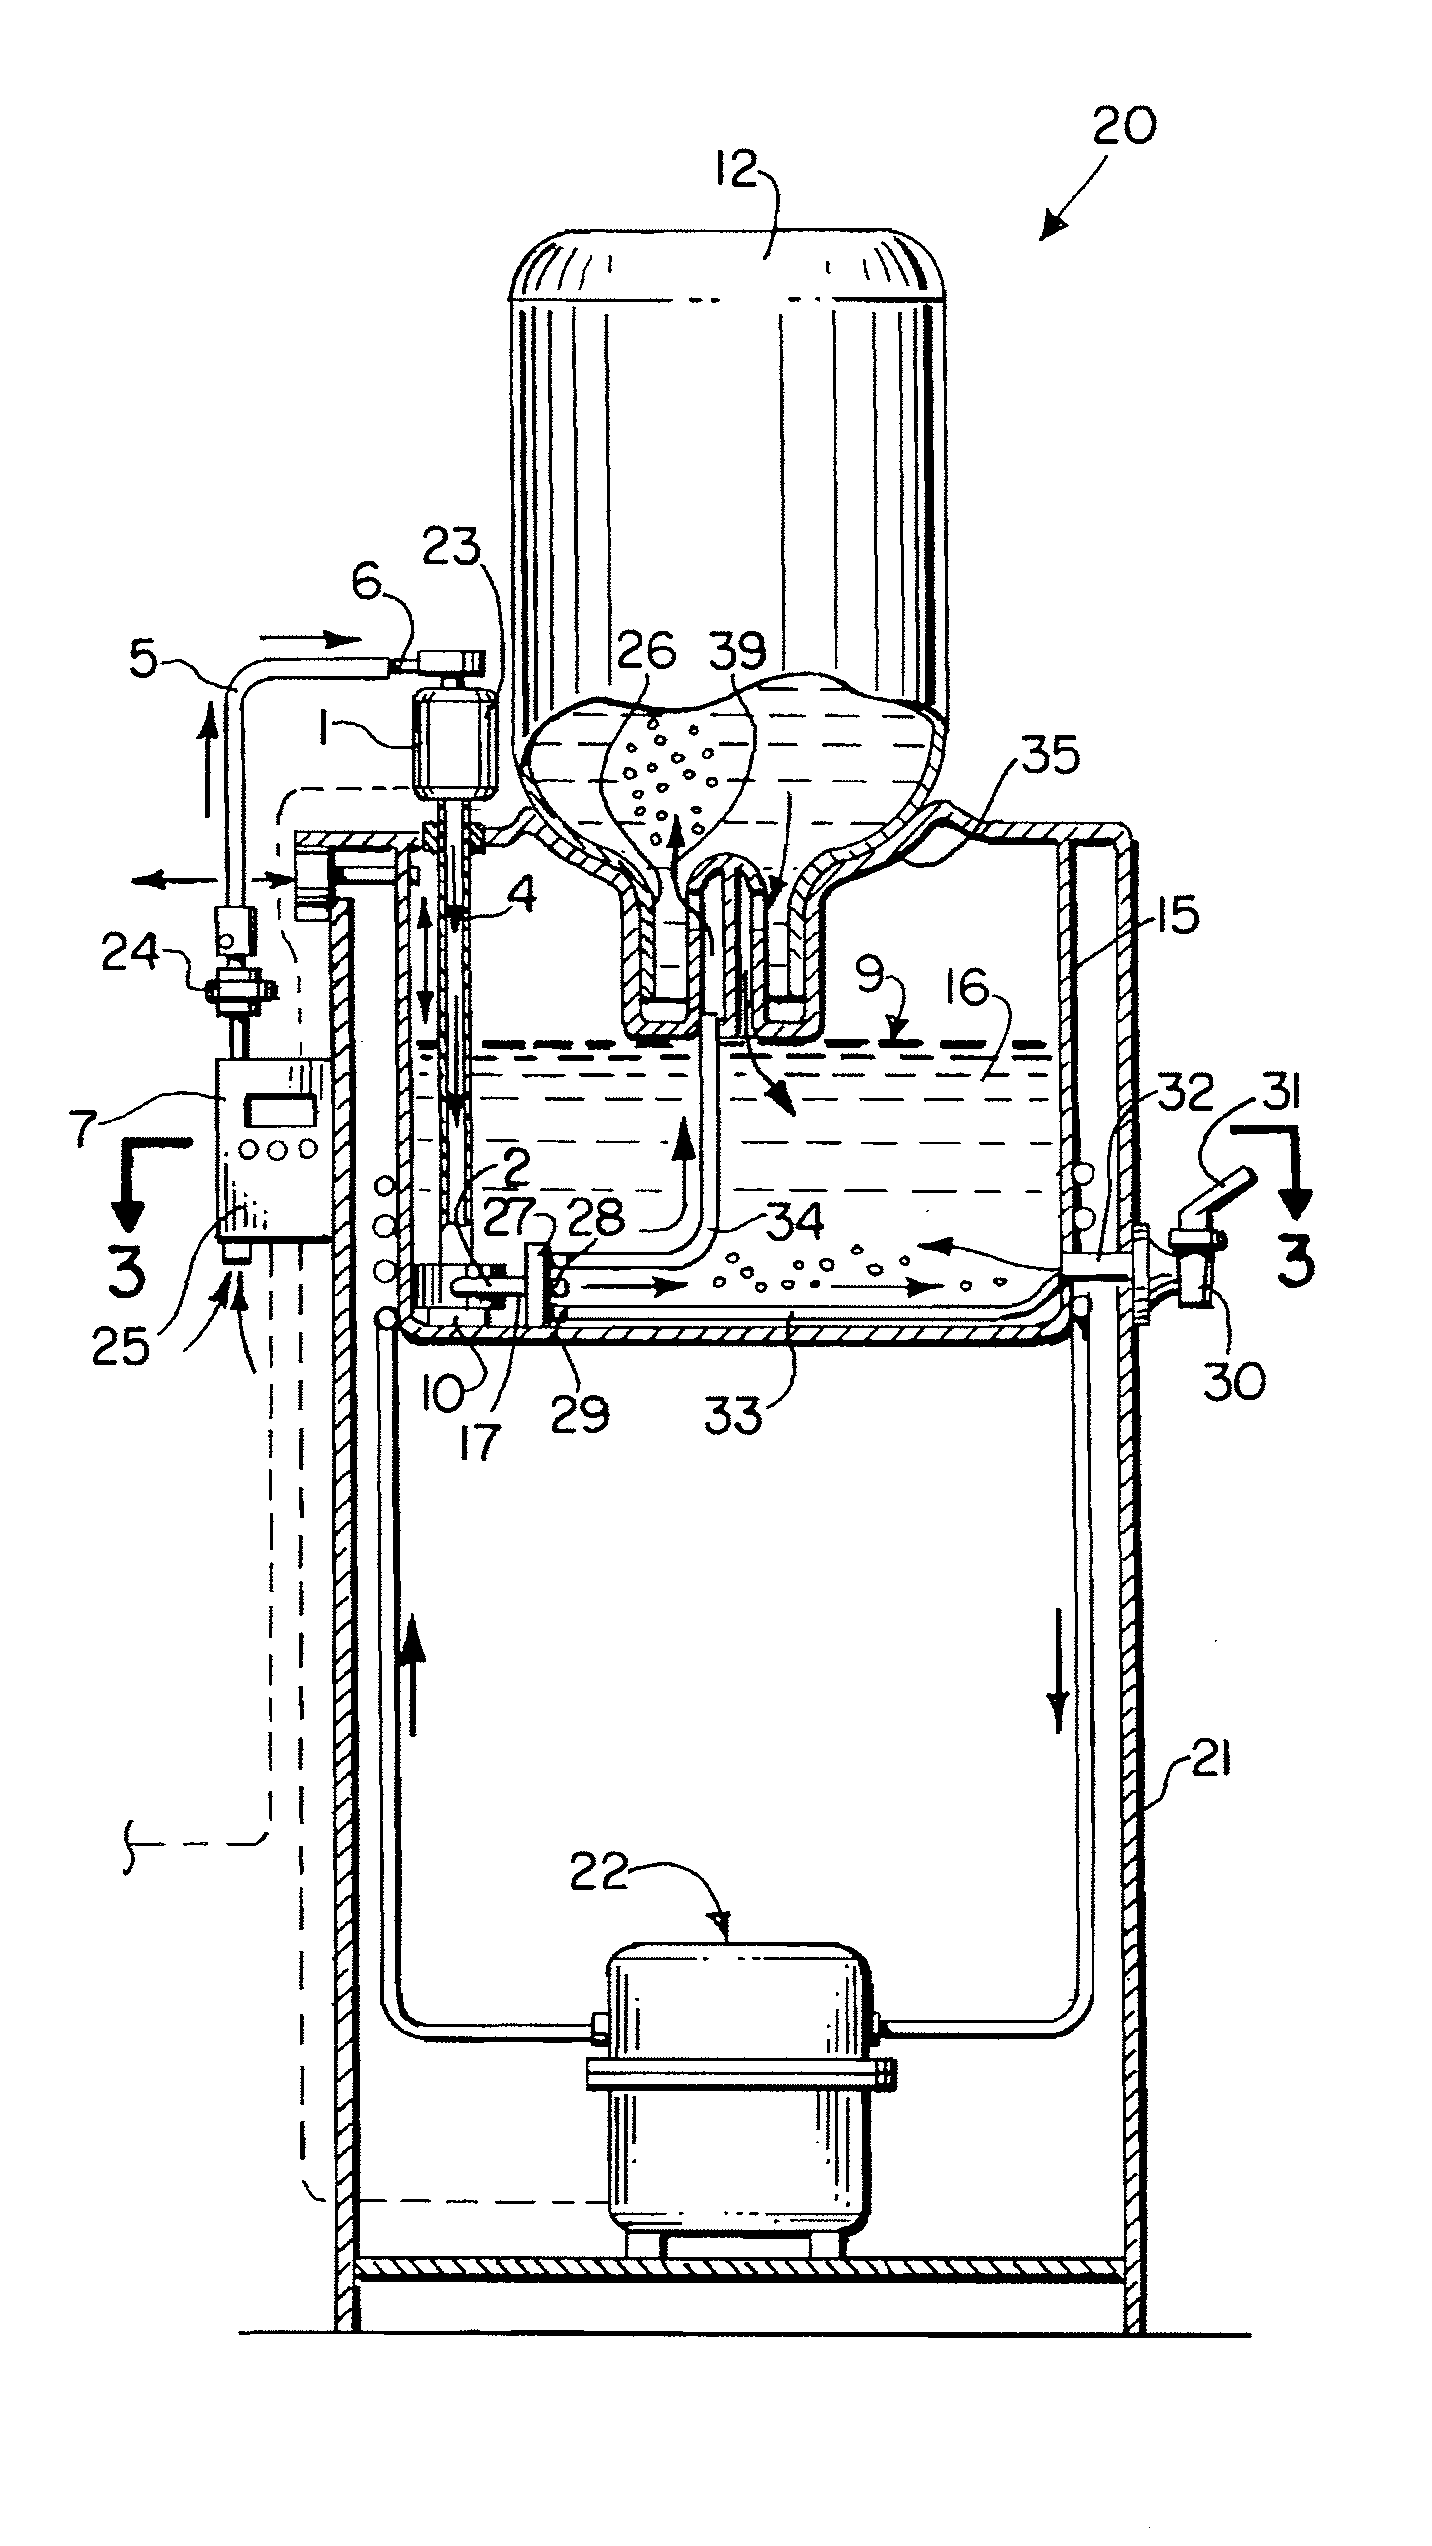 Method and apparatus for sanitizing water dispensed from a water dispenser having a reservoir